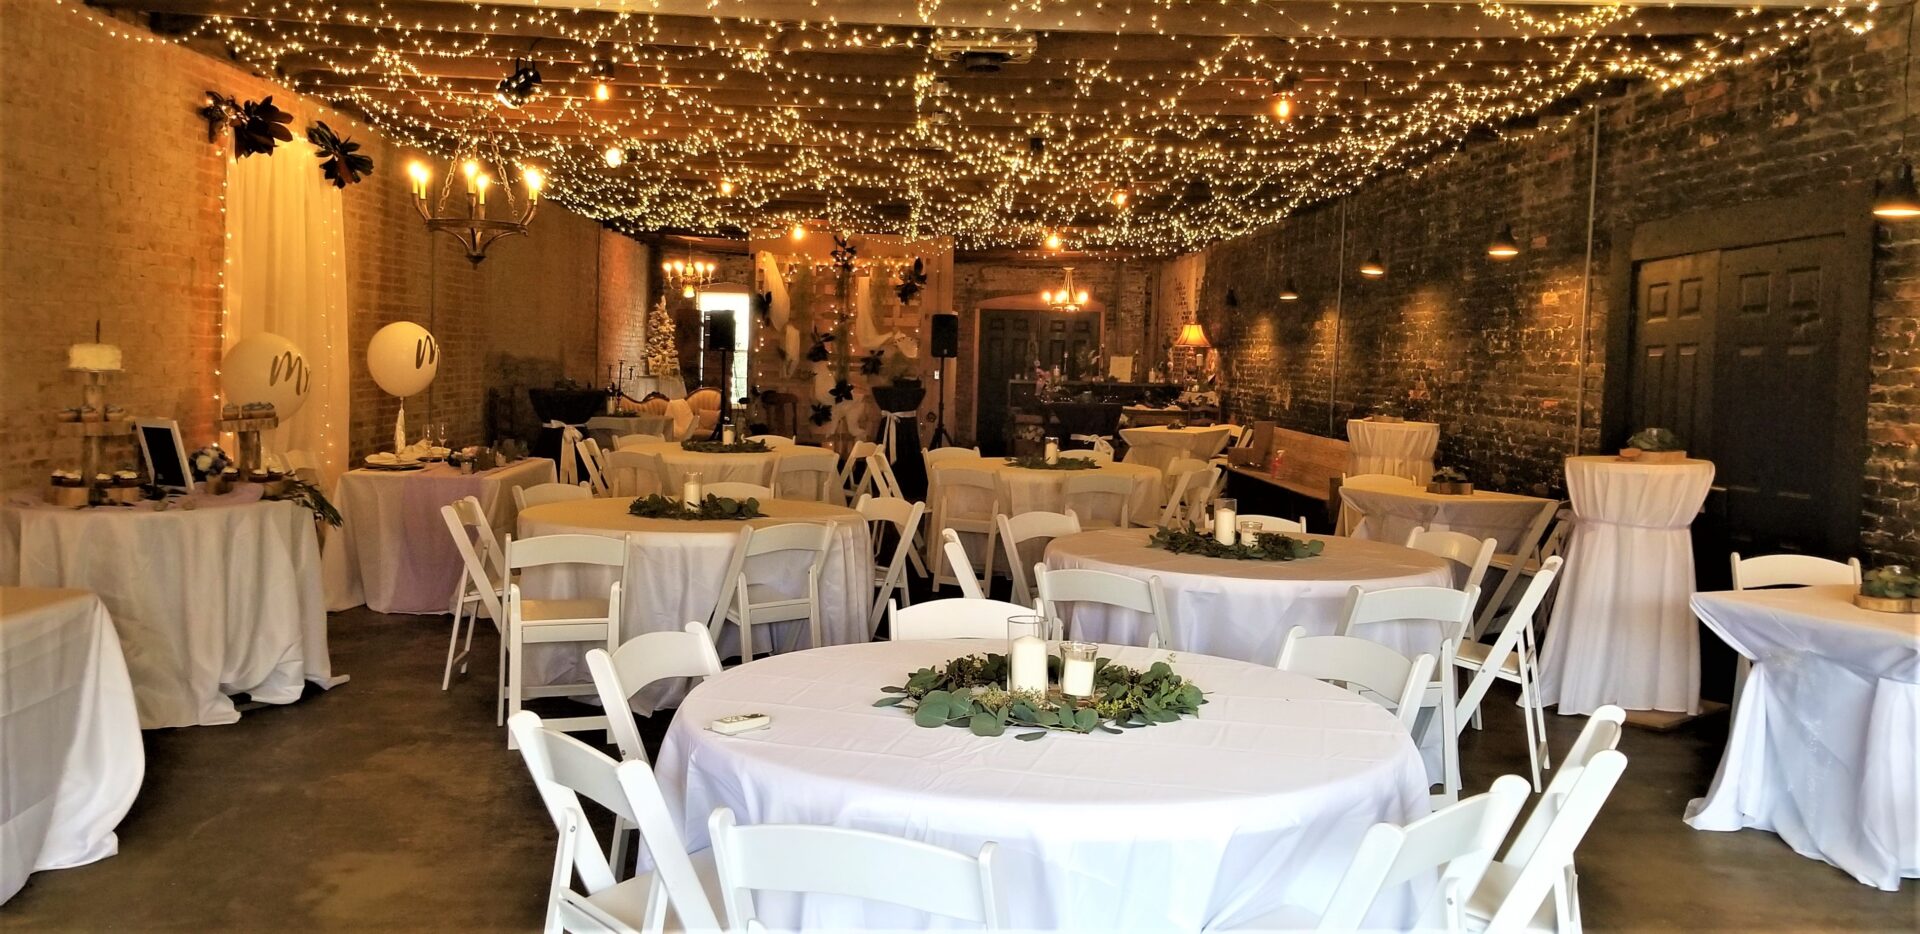 The Eclectic Banquet Hall